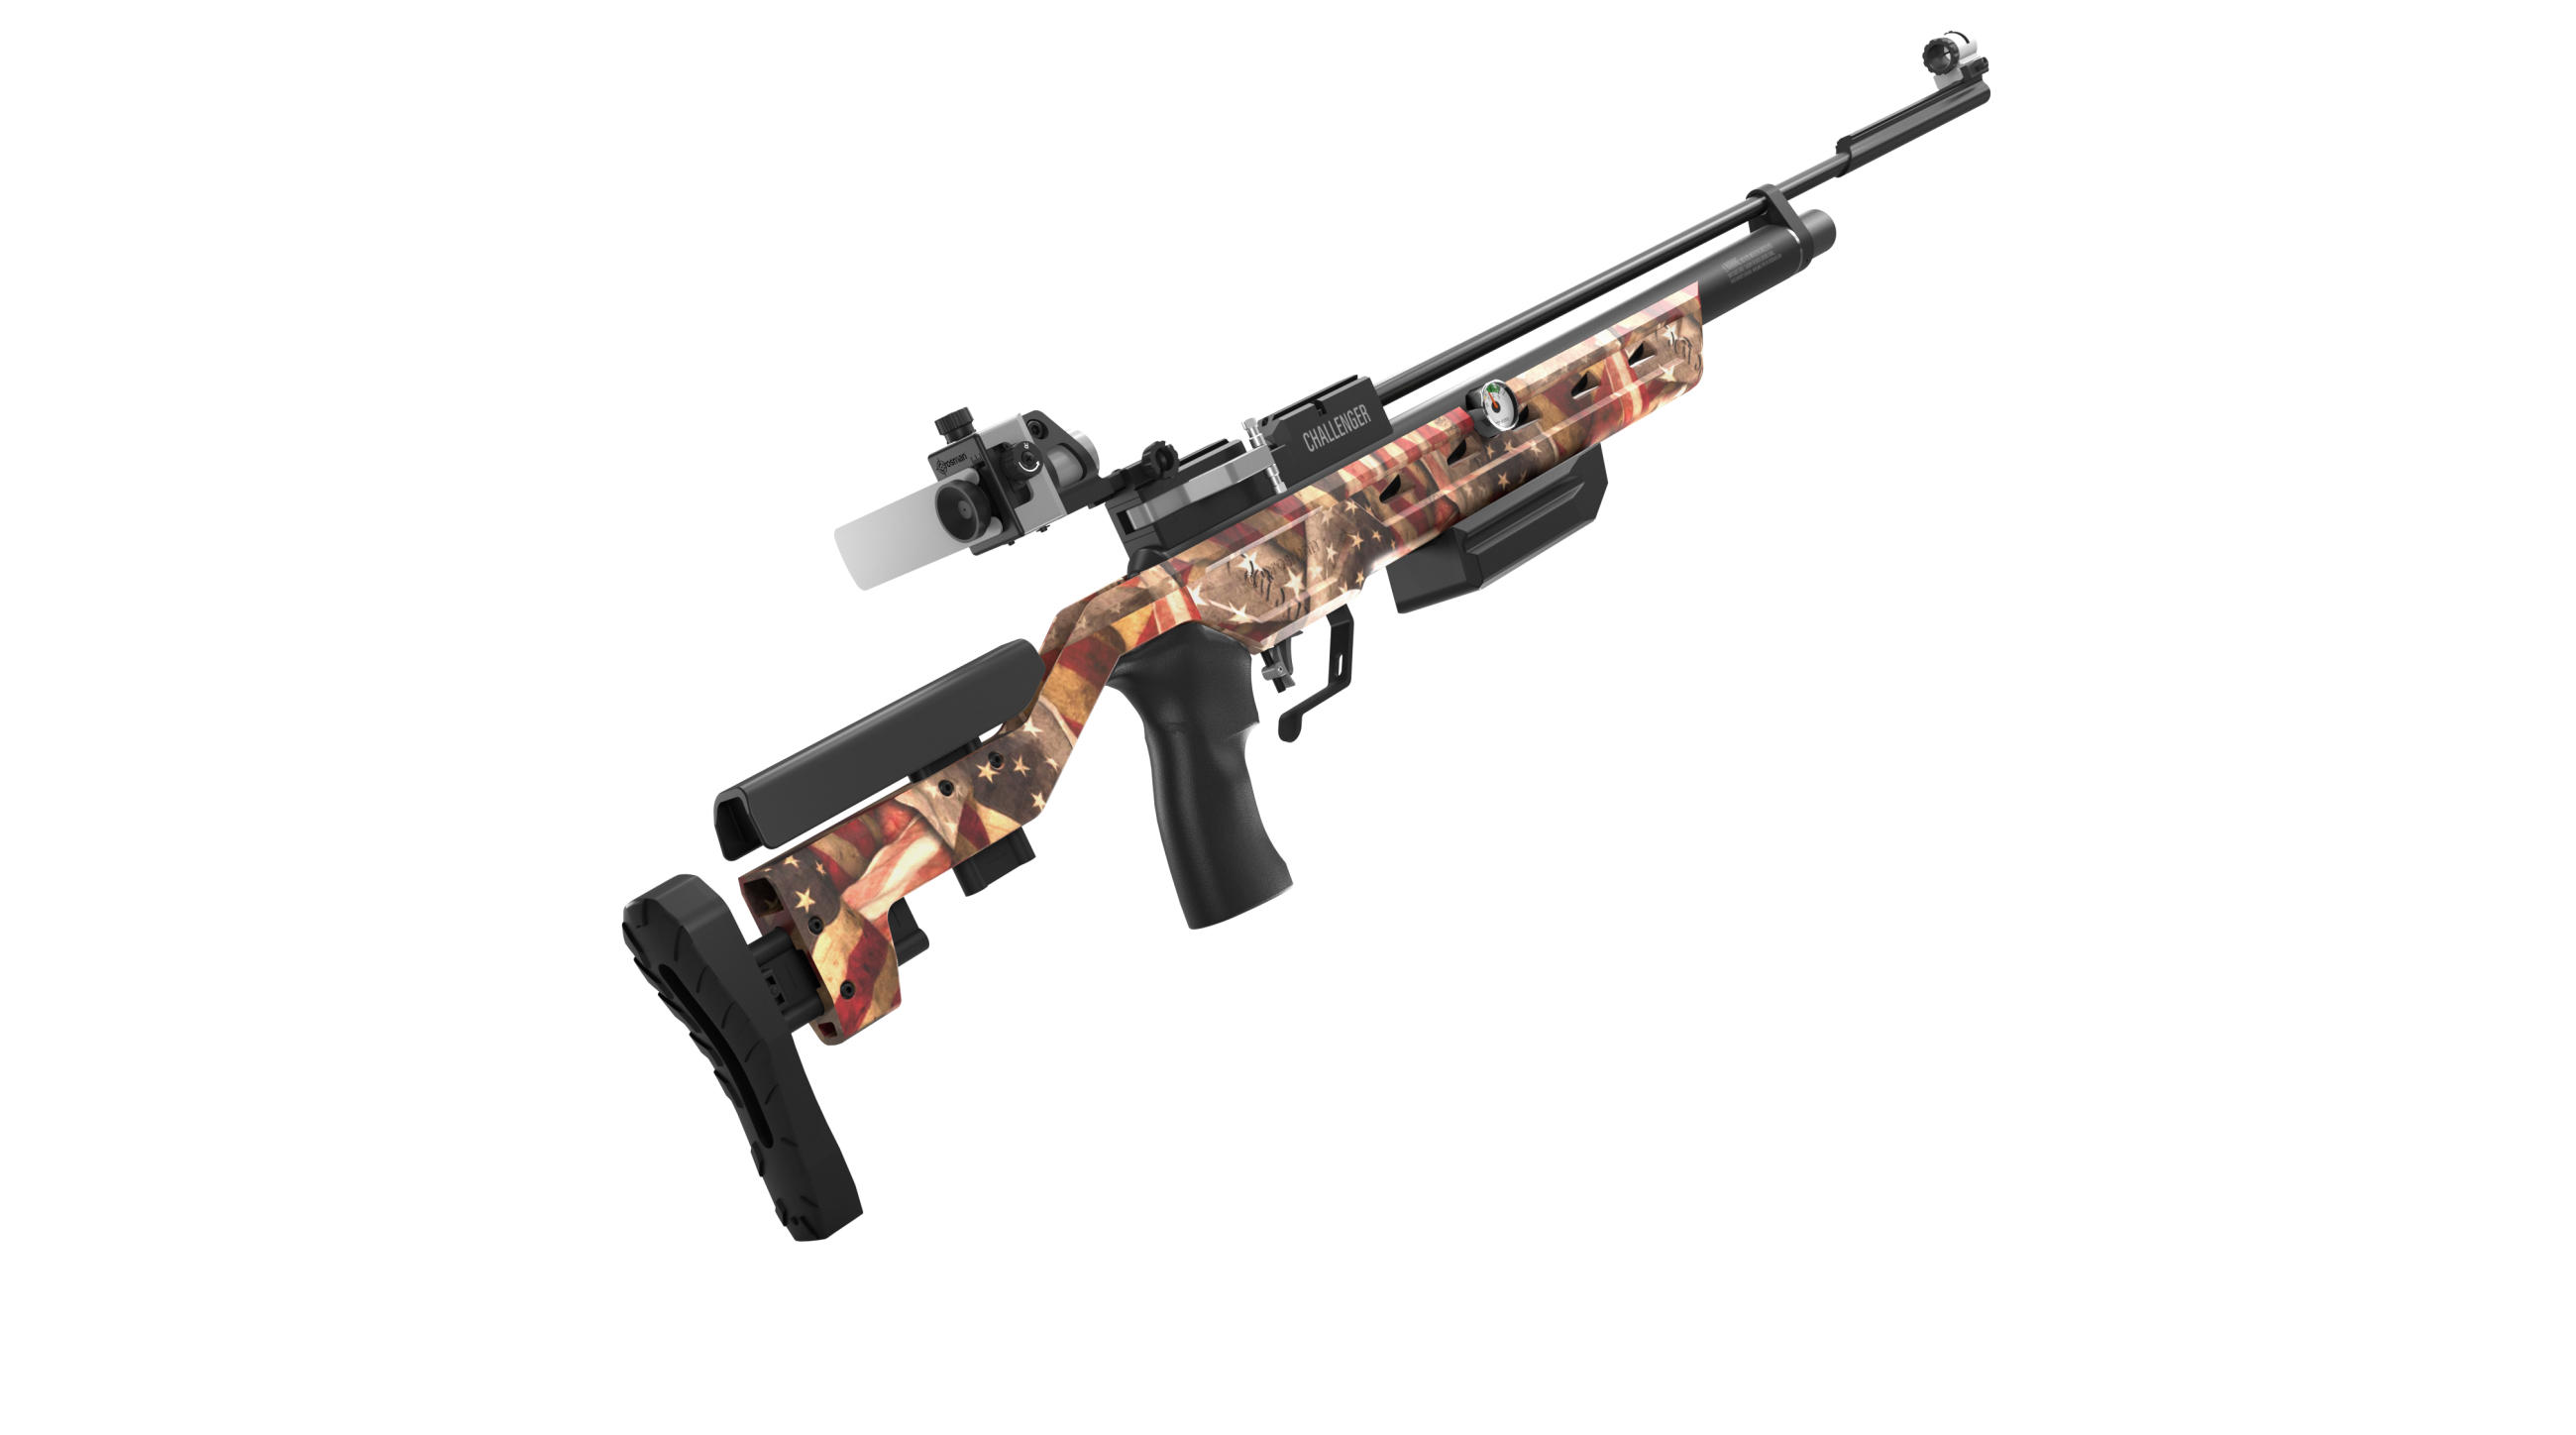 The Crosman Challenger's New Skin - American Special Flag Edition